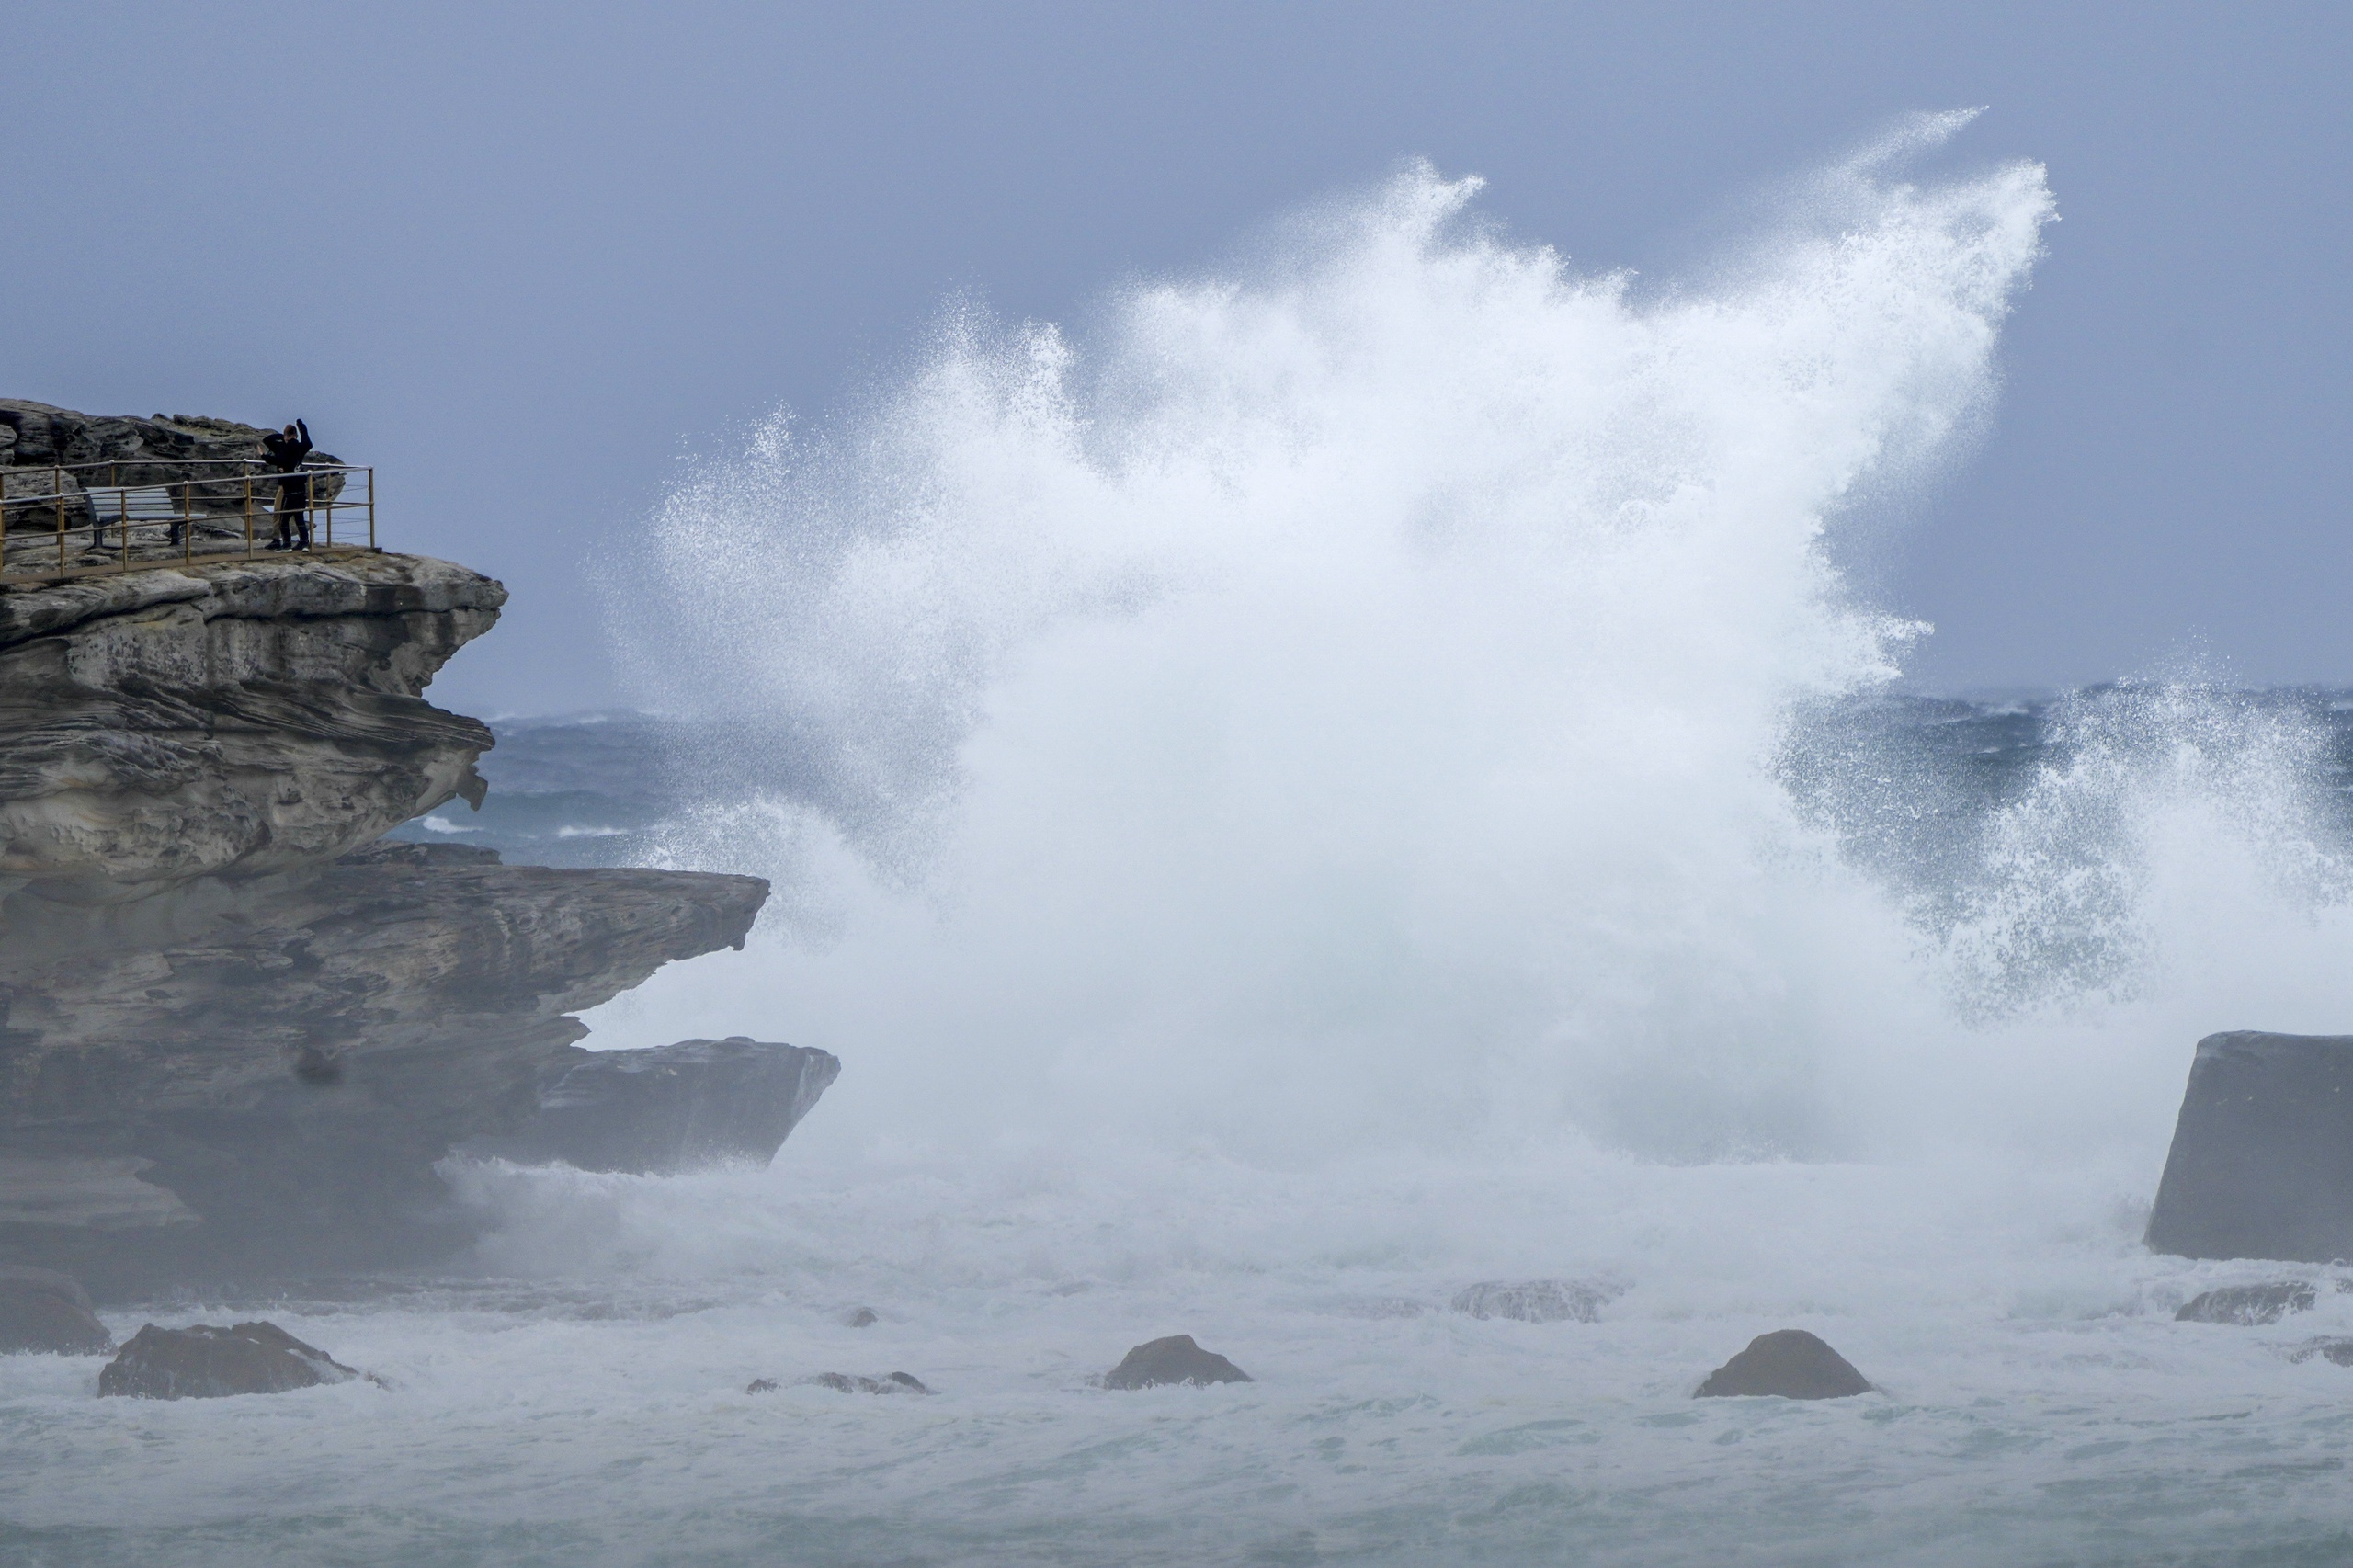 People stand on a rock ledge as huge swells hit the headland at Bondi Beach in Sydney, Australia, Sunday, July 3, 2022. A severe weather warning for heavy rainfall and strong winds has been issued for Sydney, as parts of NSW have received more than their monthly average rainfall within hours this weekend. (AP Photo/Mark Baker)